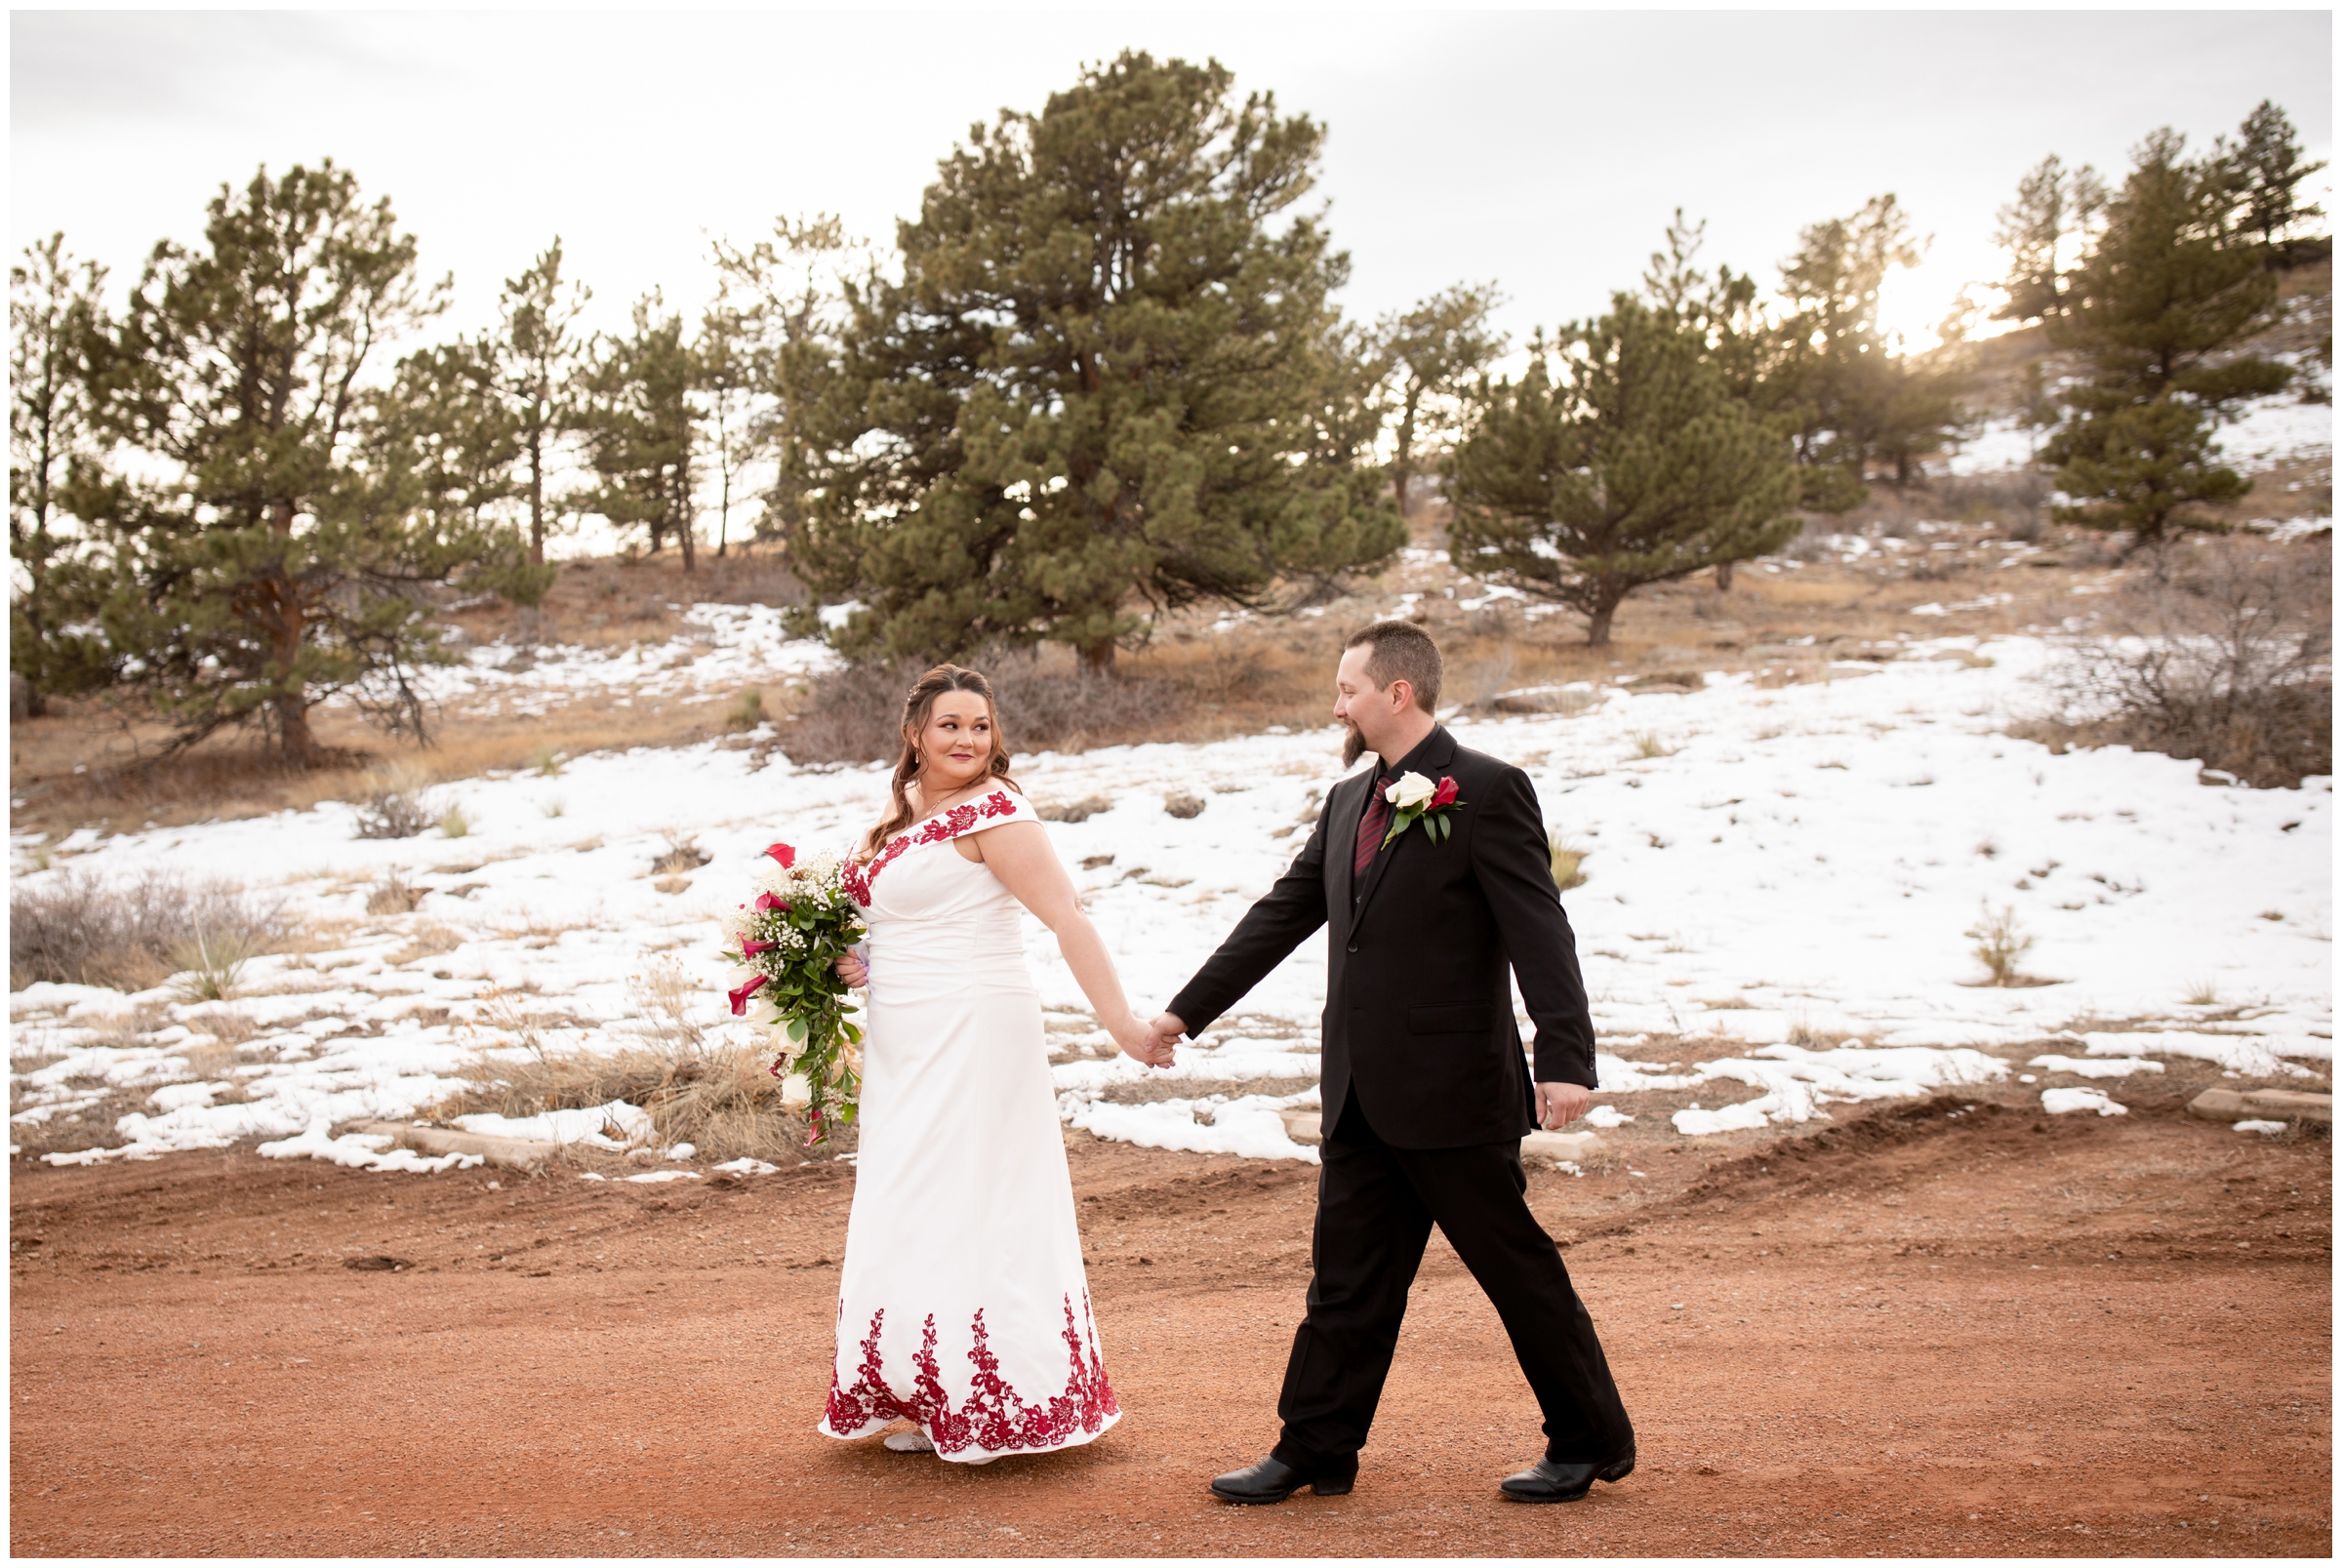 couple walking down dirt road during Colorado winter wedding pictures in the snow